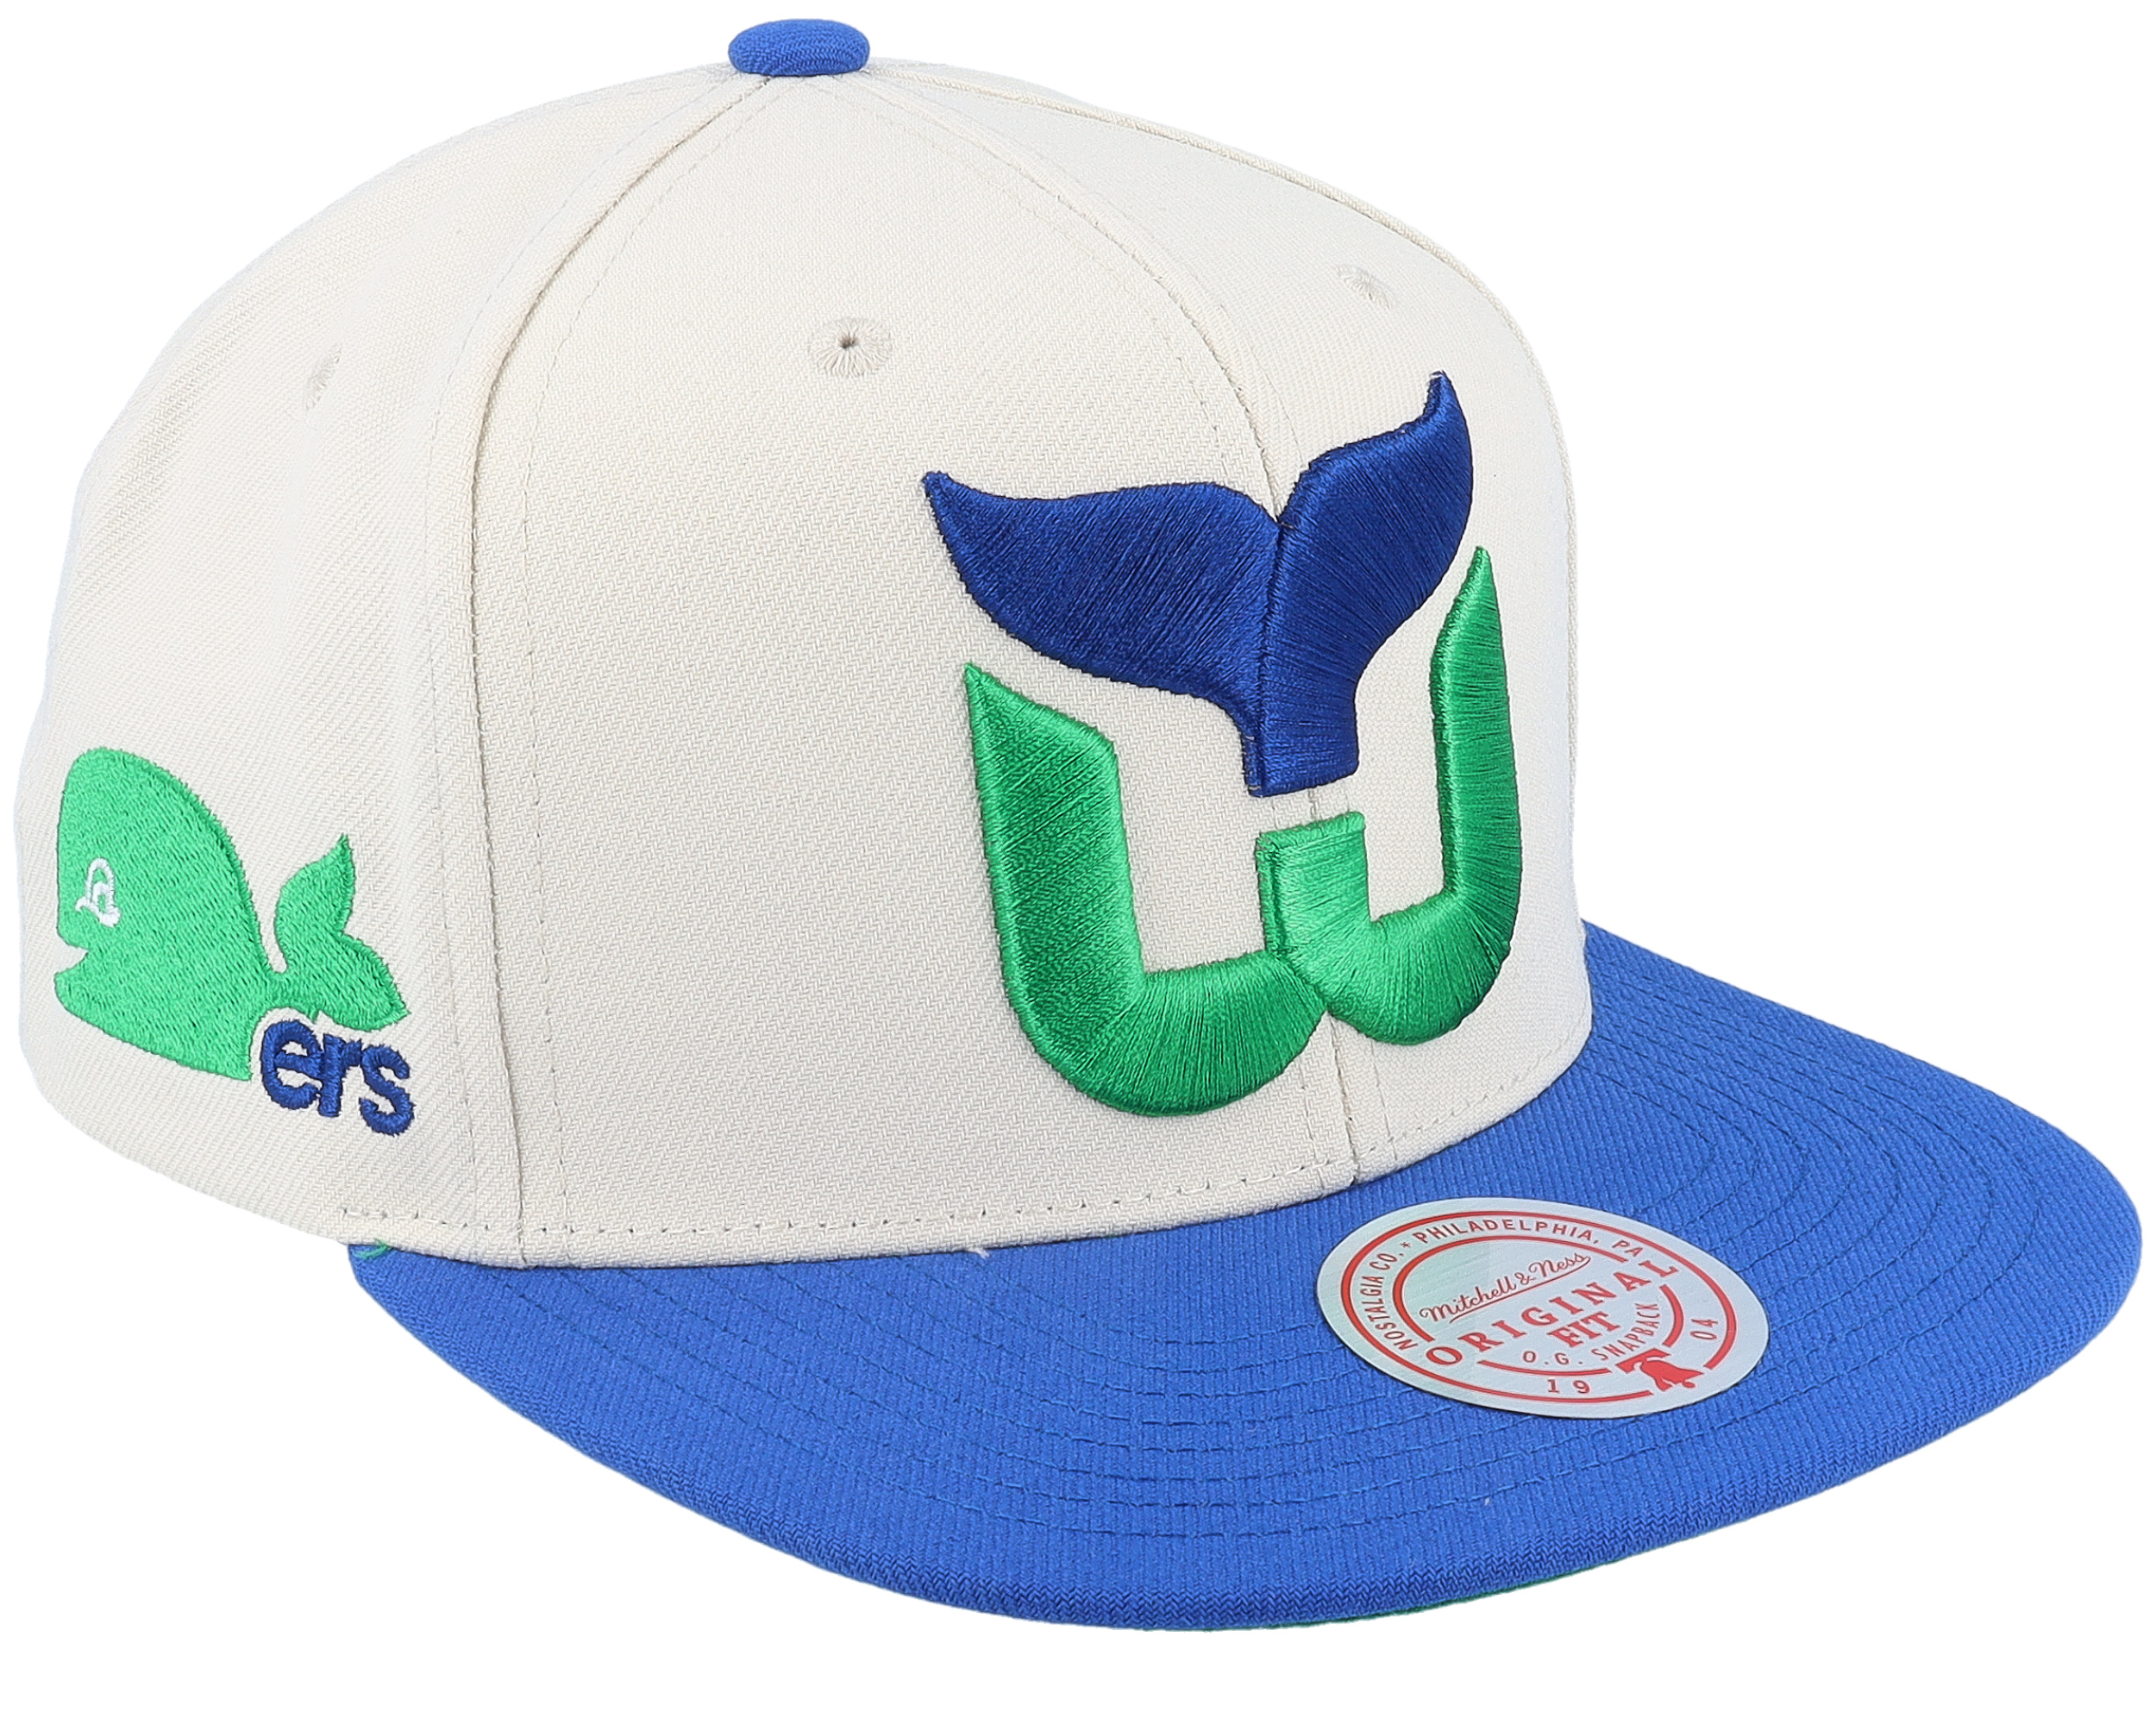 Mitchell & Ness New York Rangers Vintage Off-White Snapback Hat, MITCHELL  & NESS HATS, CAPS